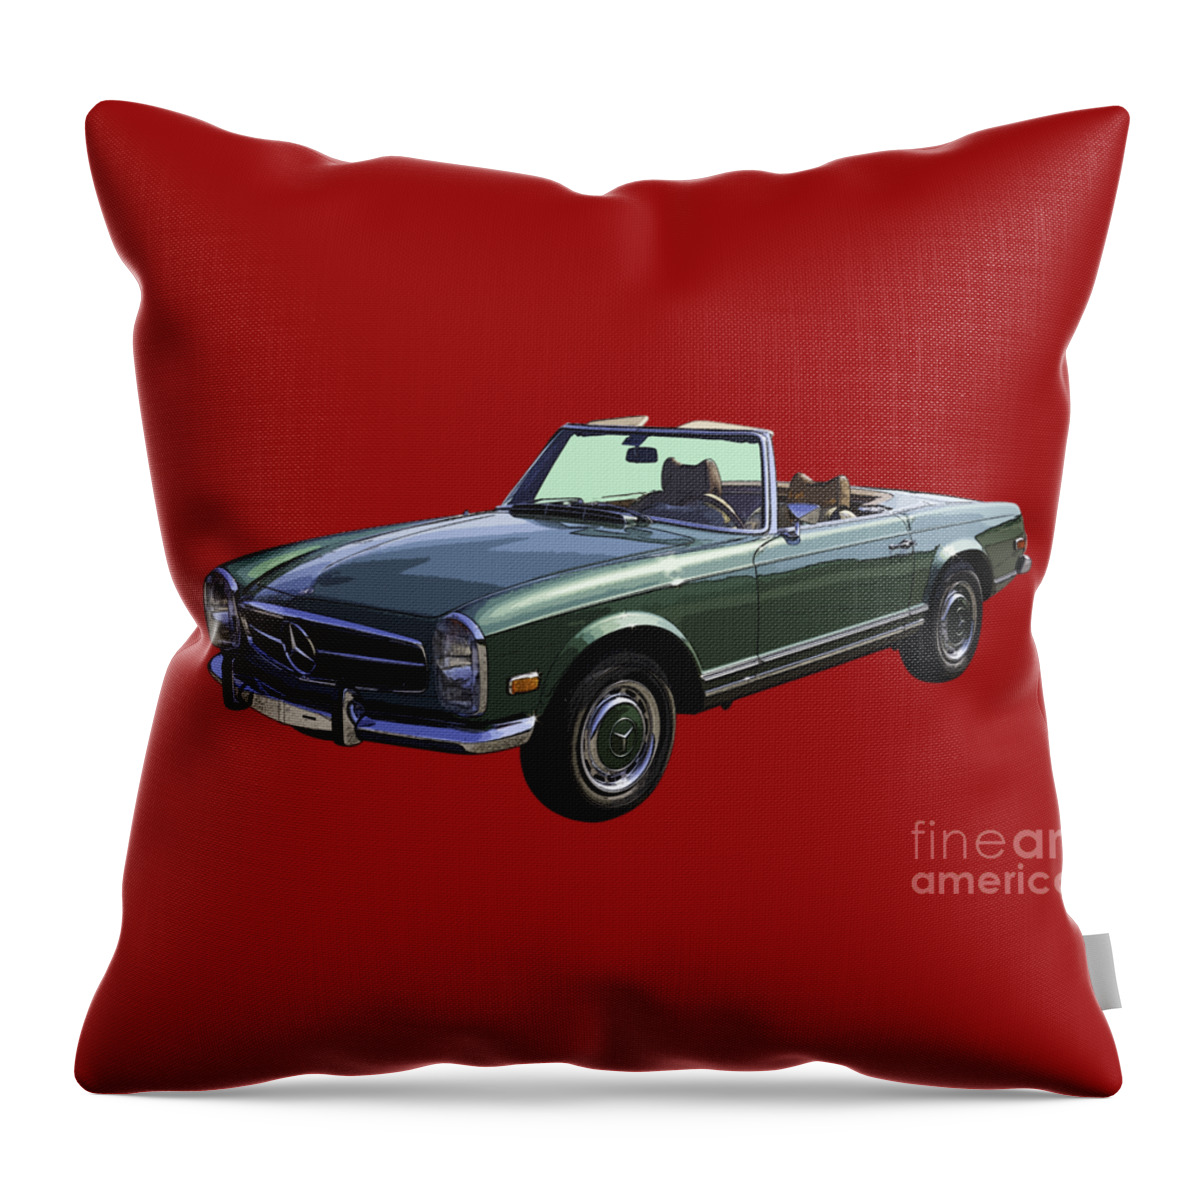 Mercedes Benz Throw Pillow featuring the photograph Classic Mercedes Benz 280 SL Convertible Automobile by Keith Webber Jr